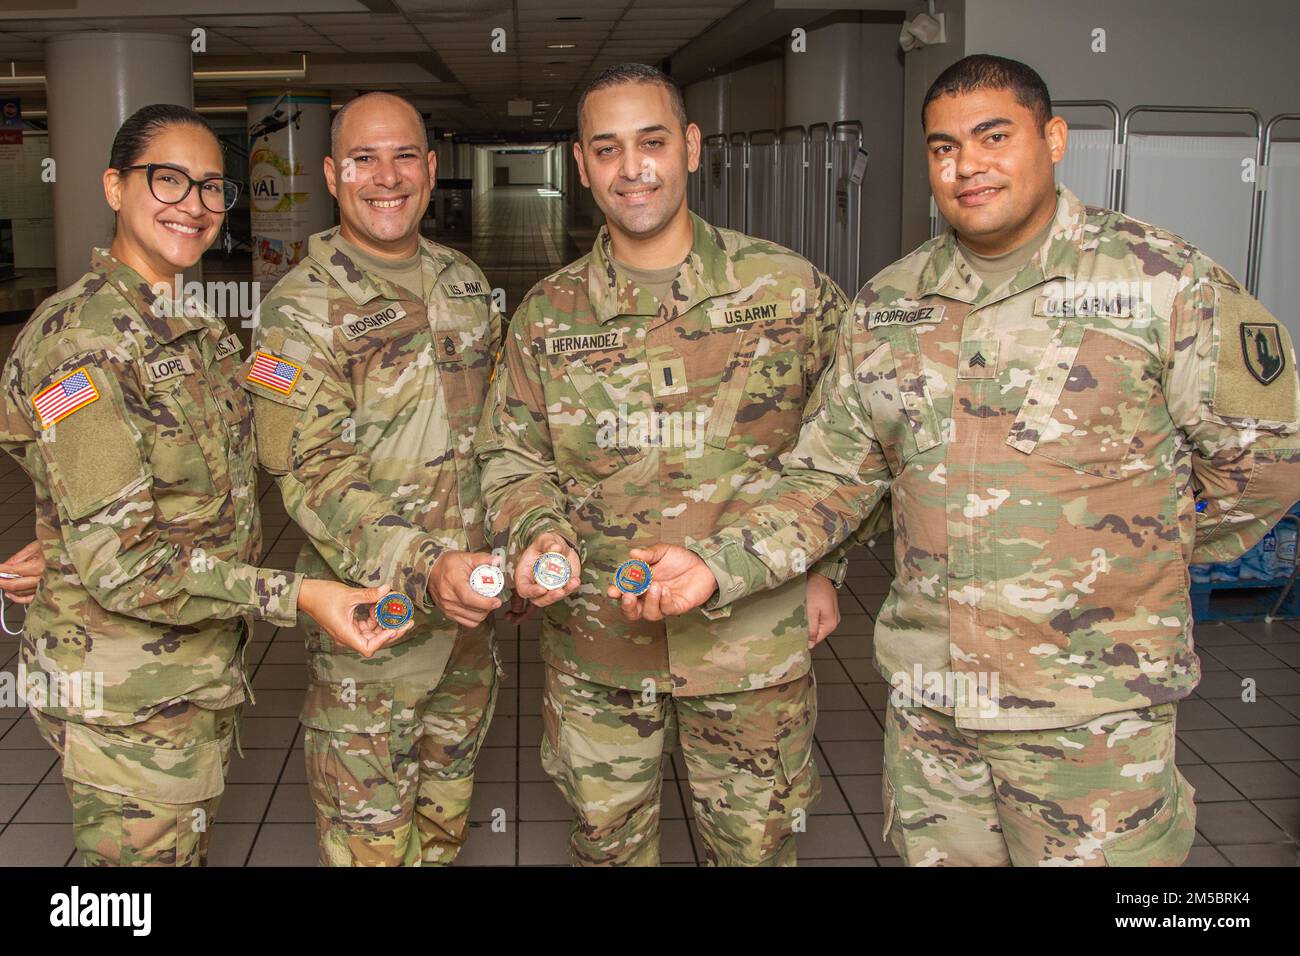 From left, Spc. Zamia López, Sgt. 1st. Class Omar Rosario, 1st. Lt. José Hernandez, and Sgt. Julio Rodríguez show the coin of excellence received from Maj. Gen. John C. Andonie, deputy director of the Army National Guard, at Luis Muñoz Marín in Carolina, Puerto Rico, Feb. 24, 2022. The deputy director of the Army National Guard visited the island to learn about the Puerto Rico National Guard's COVID-19 operations. Stock Photo